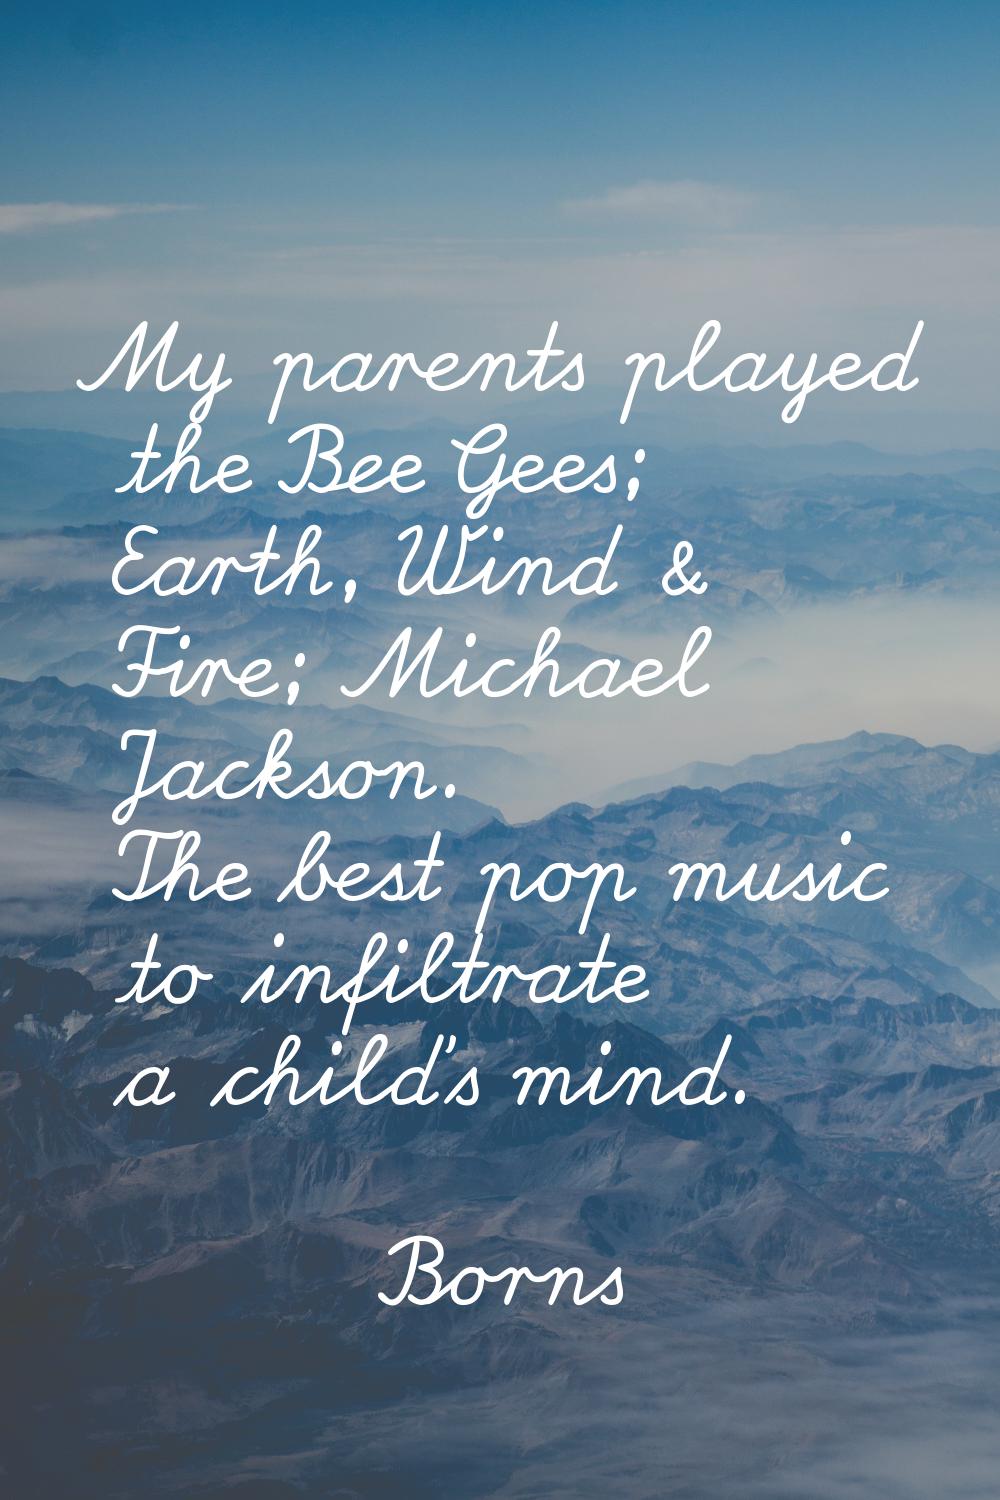 My parents played the Bee Gees; Earth, Wind & Fire; Michael Jackson. The best pop music to infiltra